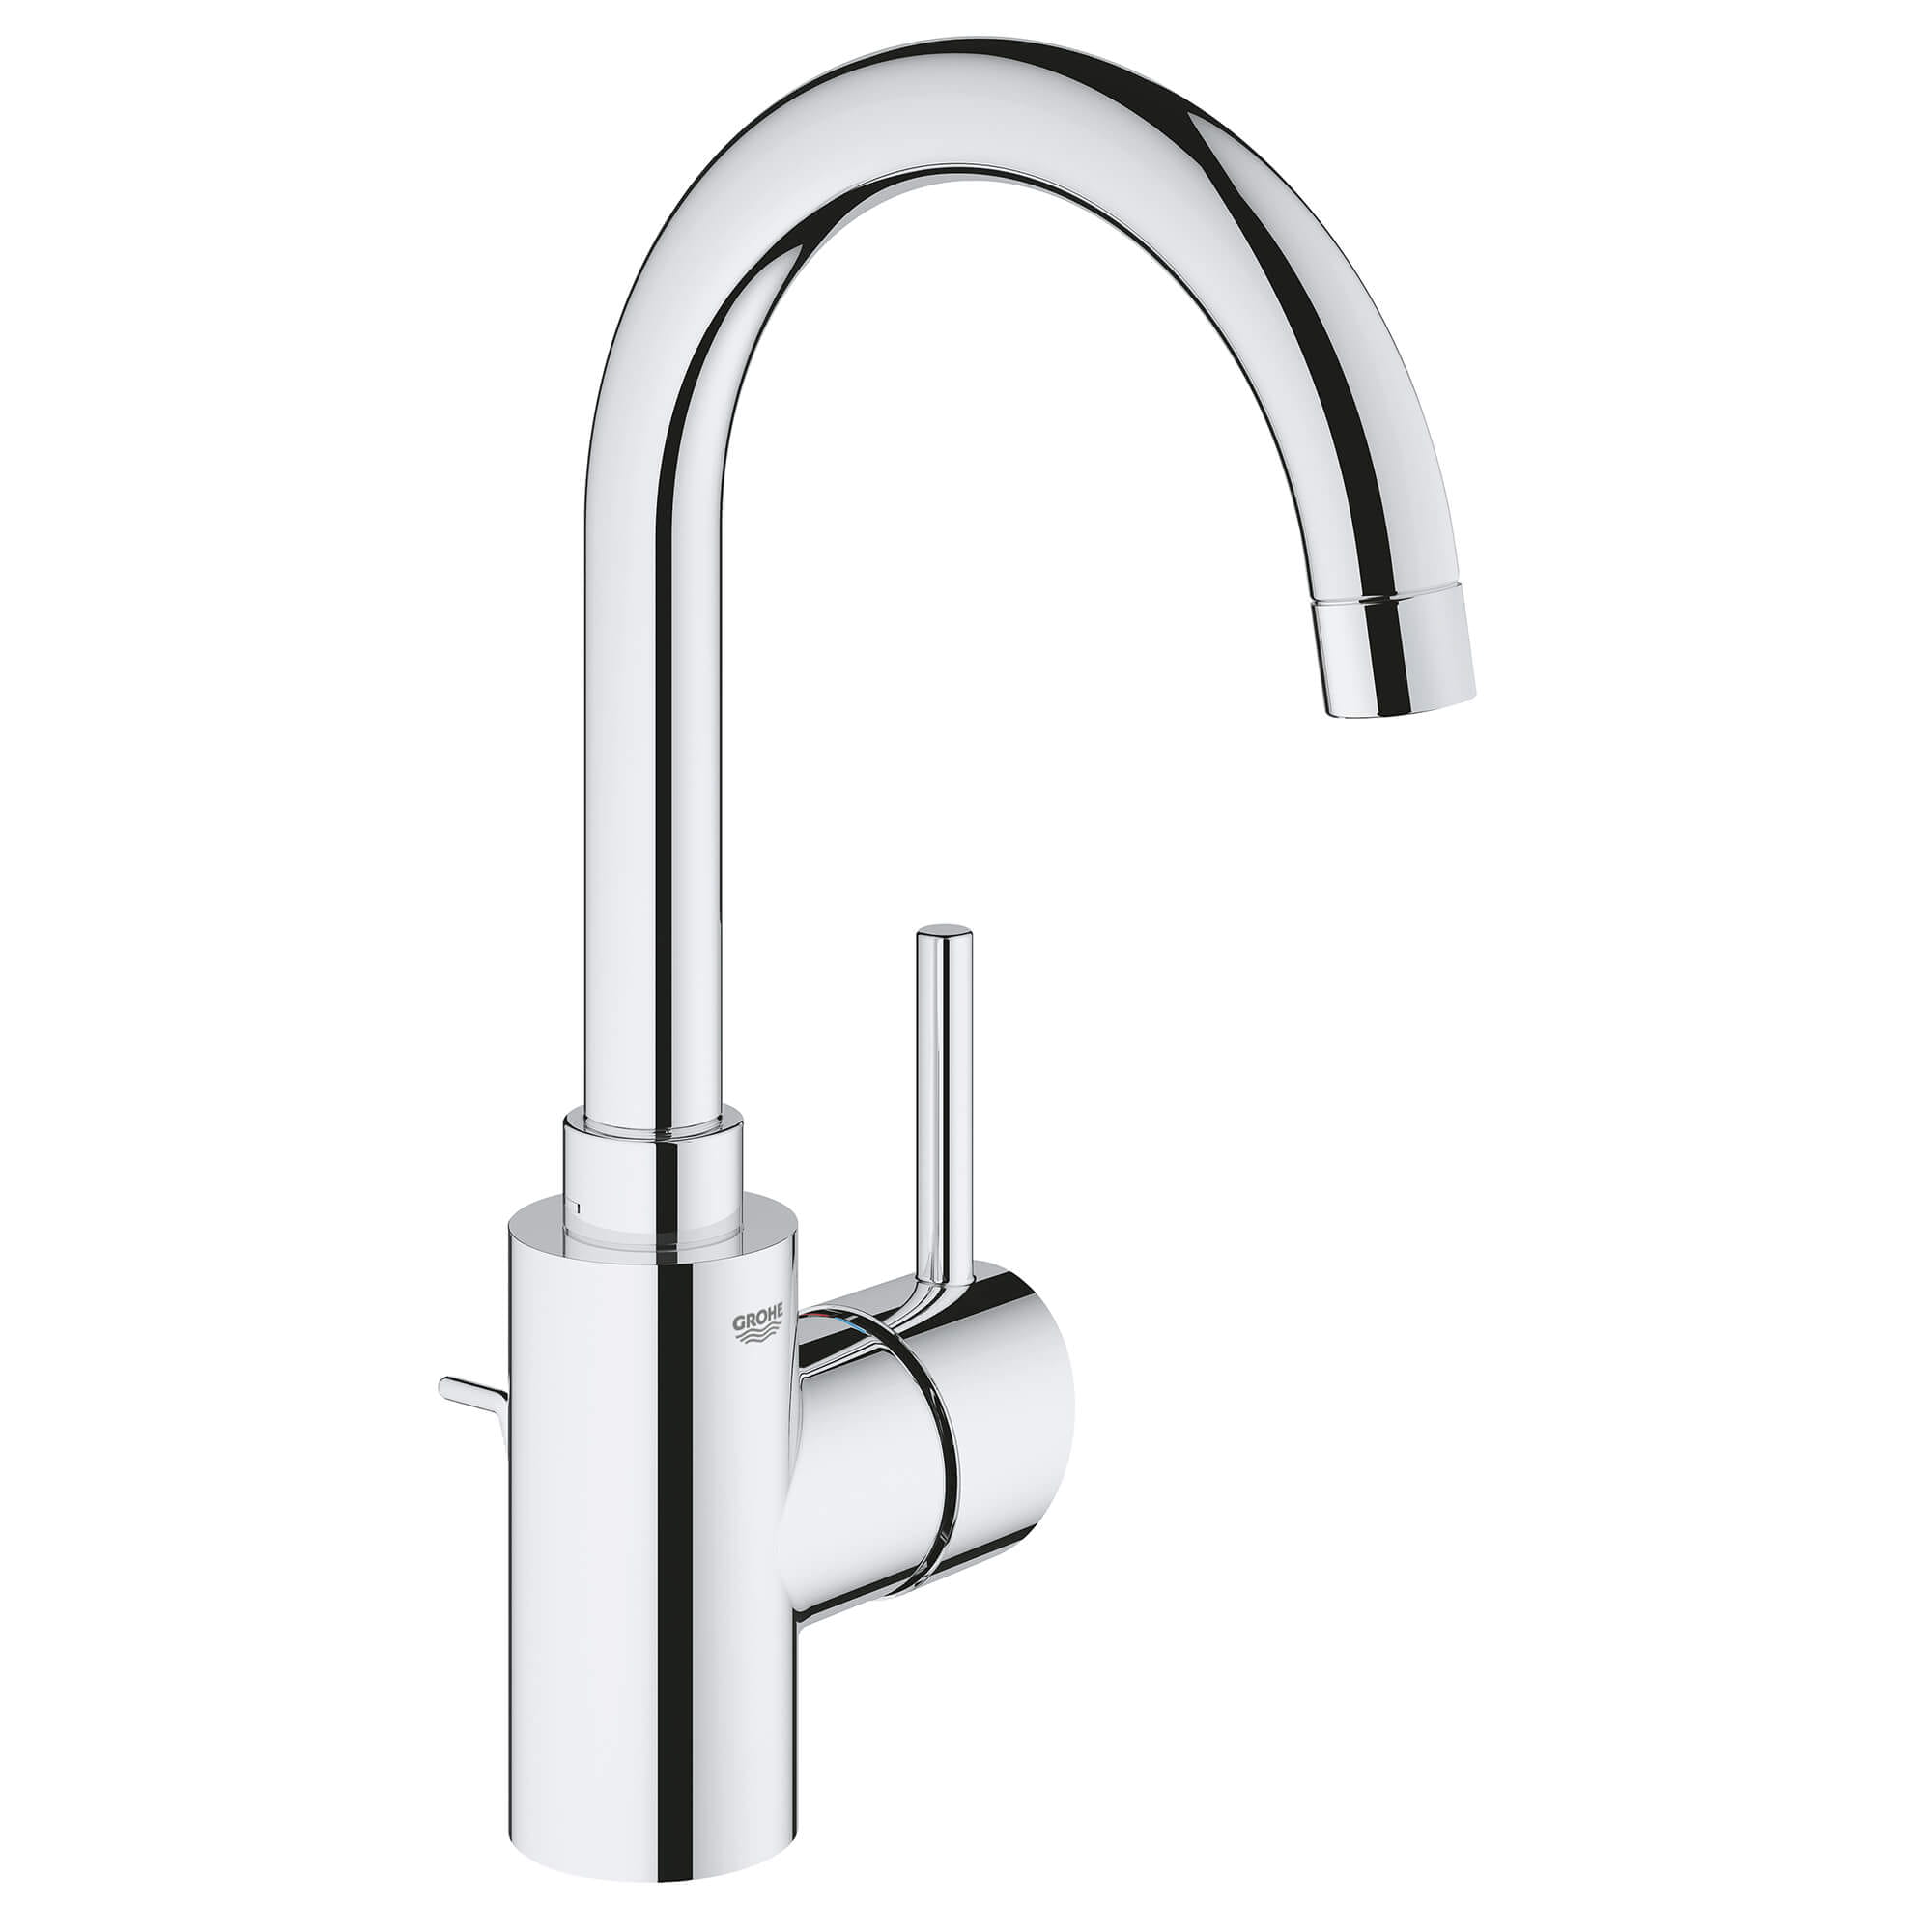 SINGLE HOLE SINGLE-HANDLE L-SIZE BATHROOM FAUCET 1.2 GPM-related